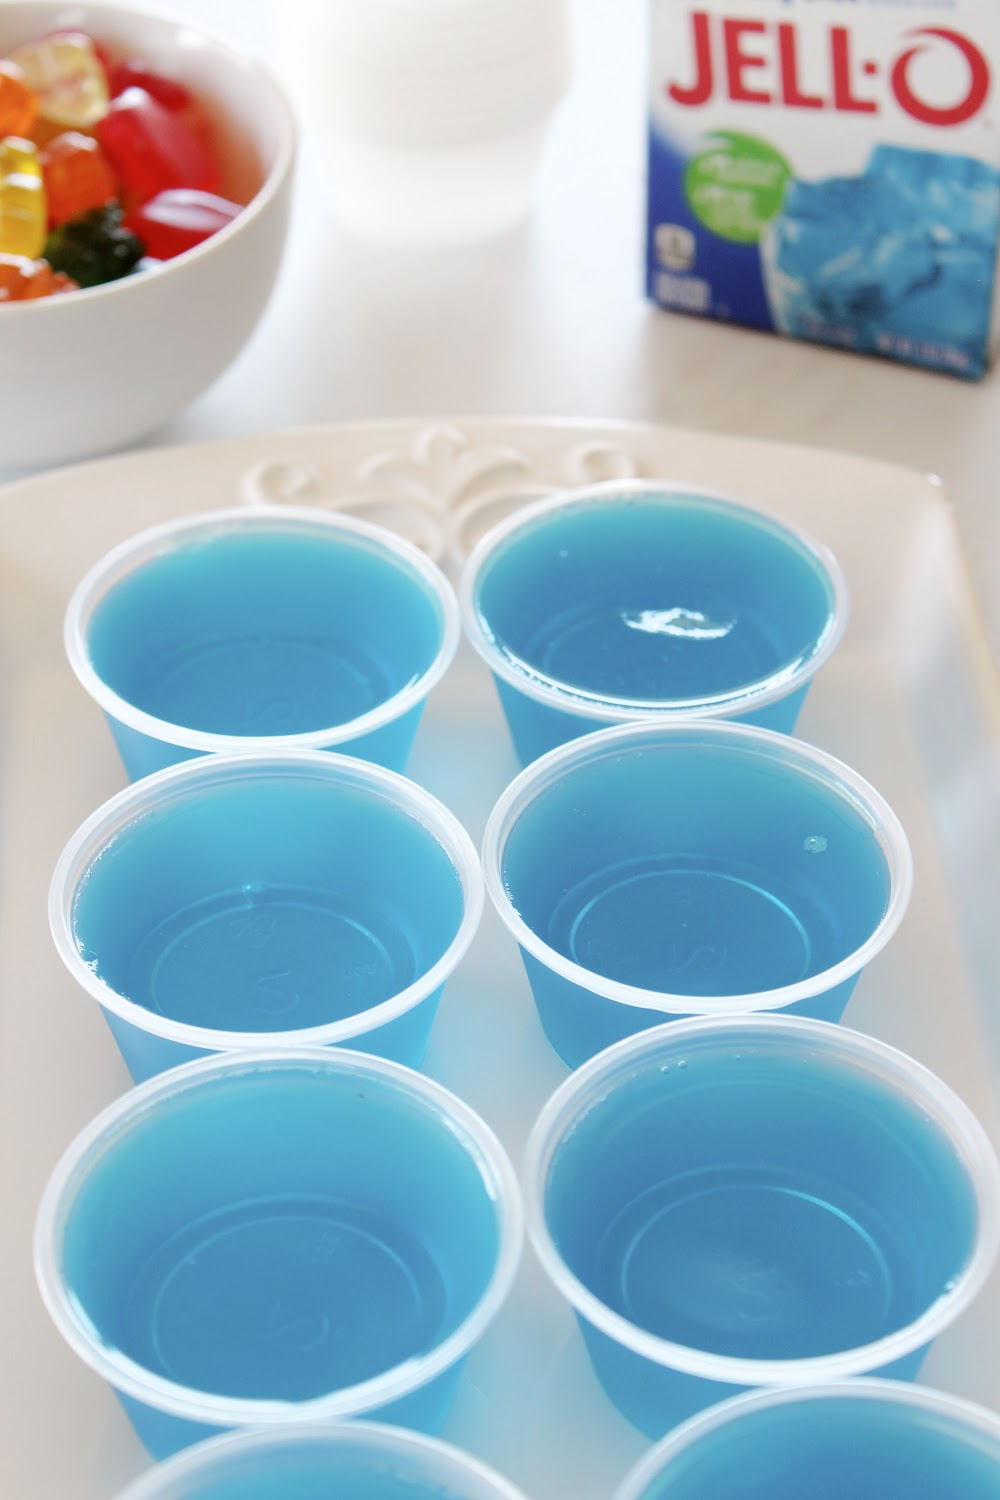 Line the small cups up in a row and fill with jello mixture. Then refrigerate.